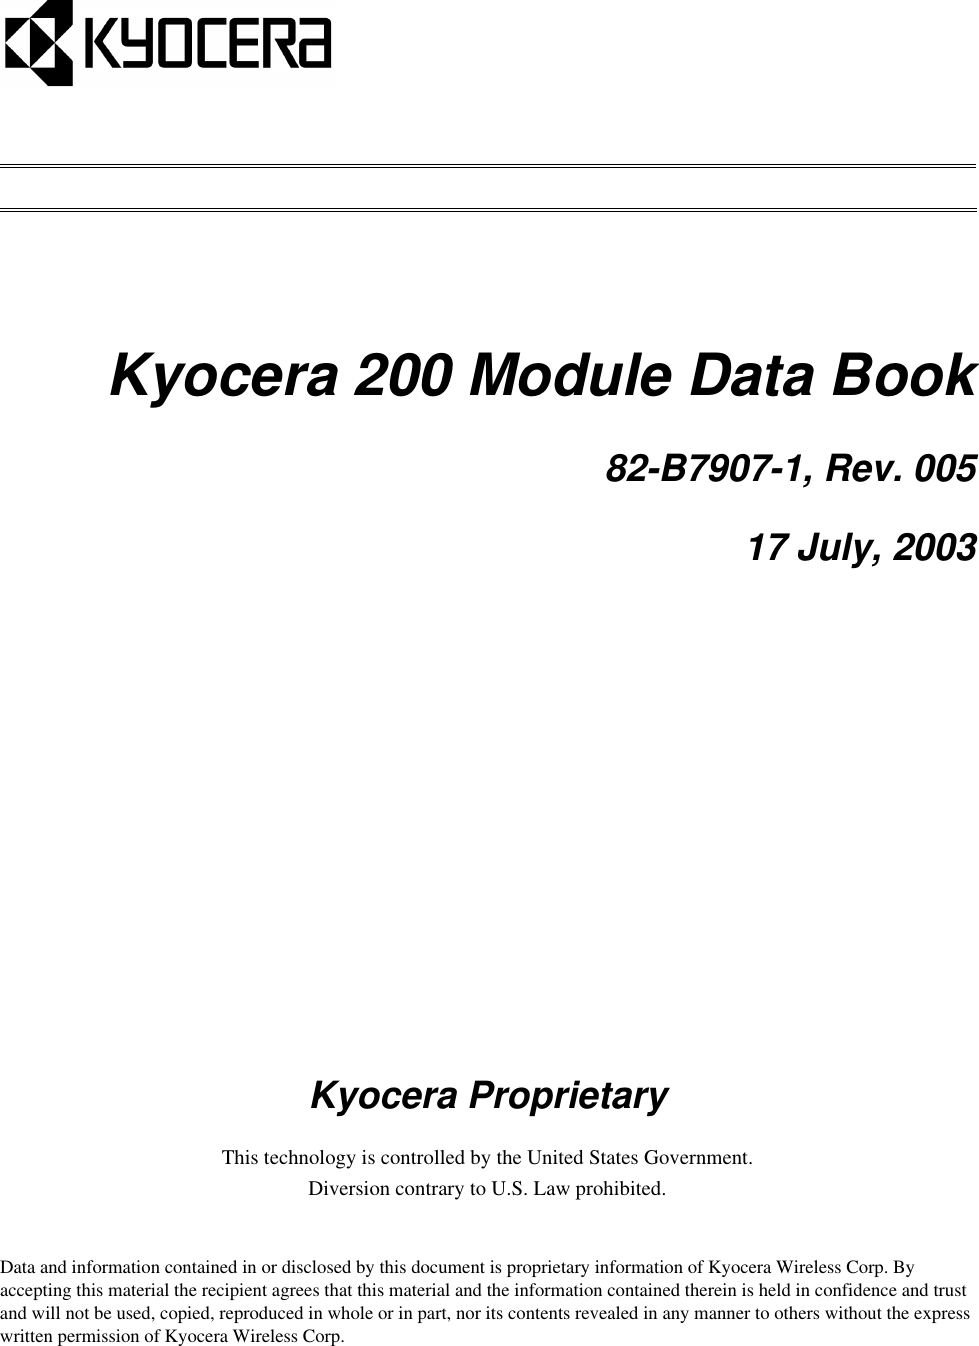 Kyocera 200 Module Data Book82-B7907-1, Rev. 00517 July, 2003Kyocera ProprietaryThis technology is controlled by the United States Government.Diversion contrary to U.S. Law prohibited. Data and information contained in or disclosed by this document is proprietary information of Kyocera Wireless Corp. By accepting this material the recipient agrees that this material and the information contained therein is held in confidence and trust and will not be used, copied, reproduced in whole or in part, nor its contents revealed in any manner to others without the express written permission of Kyocera Wireless Corp.